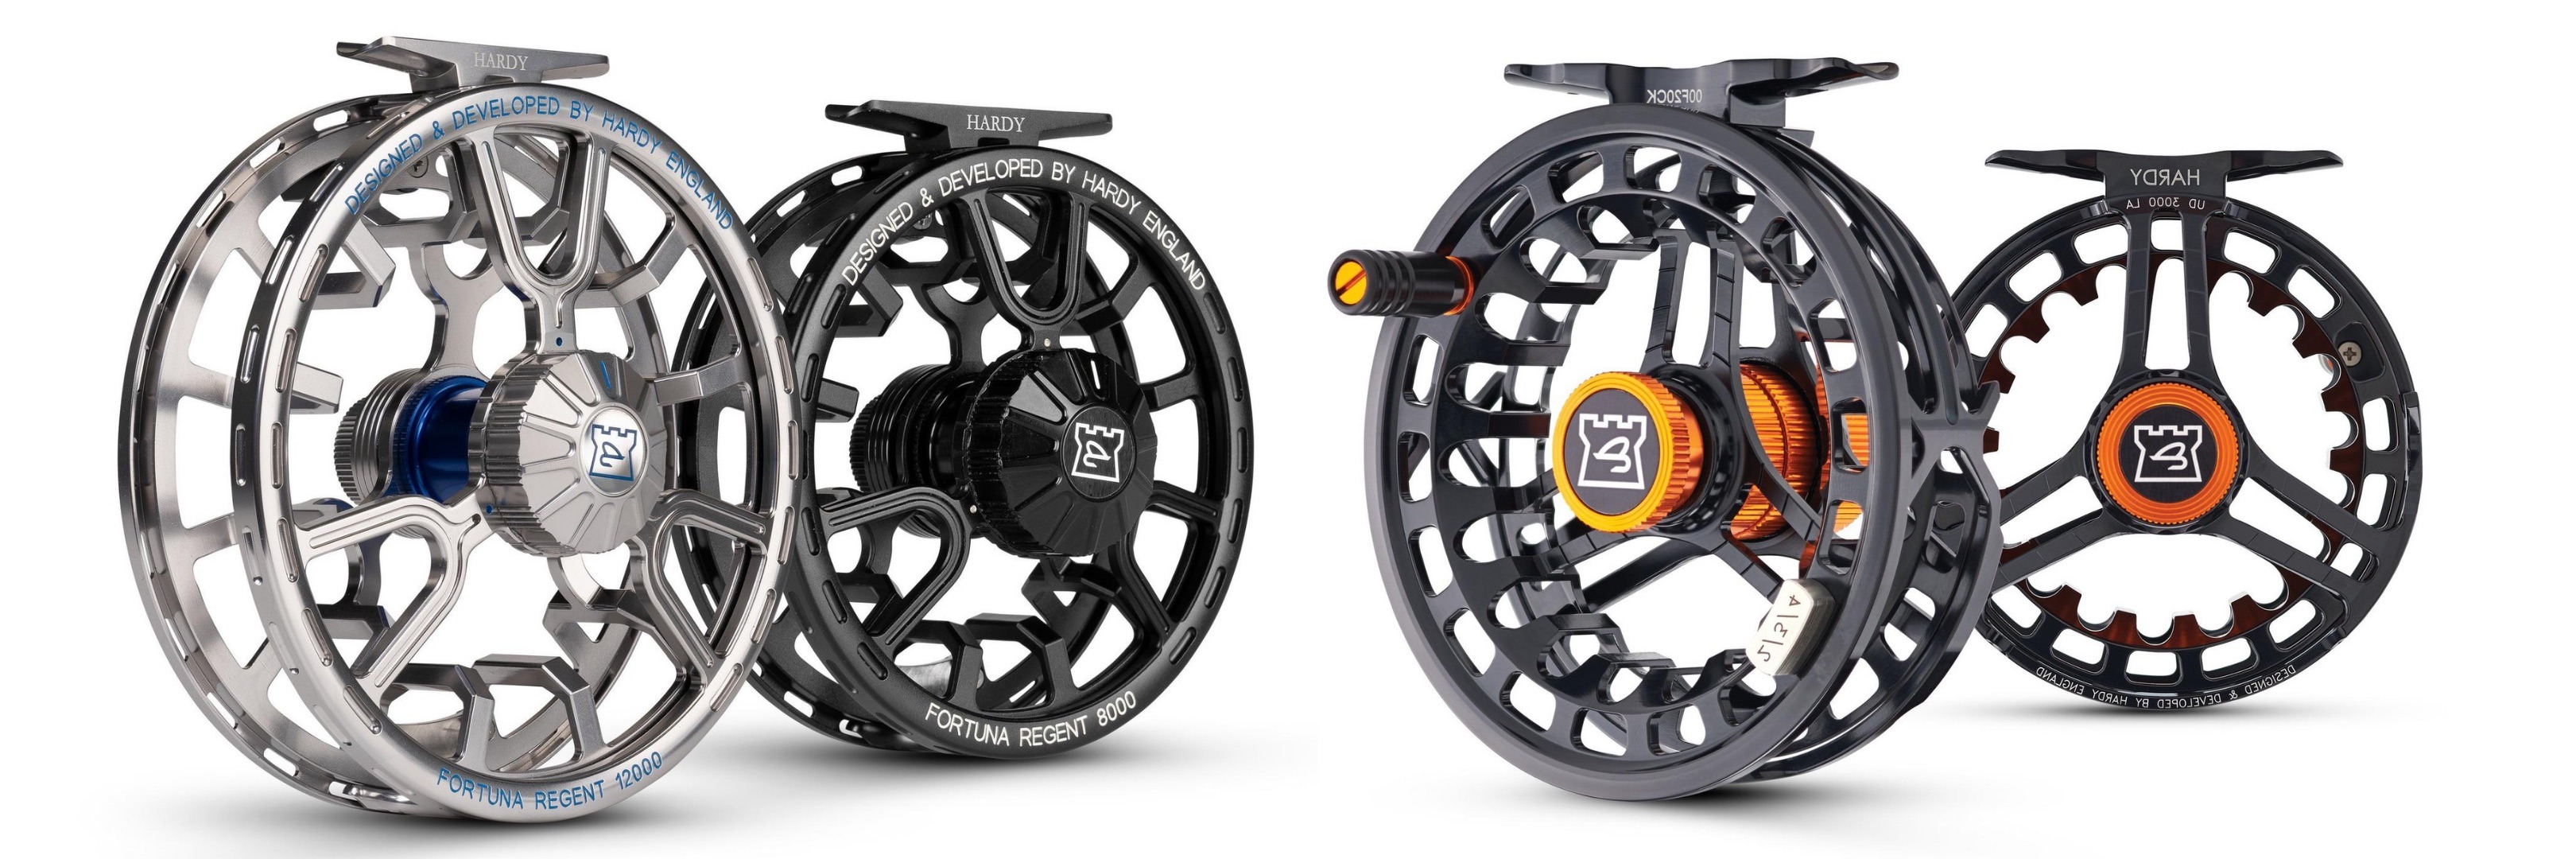 Shop Hardy Fly Reels: Fortuna, Ultralite, and More